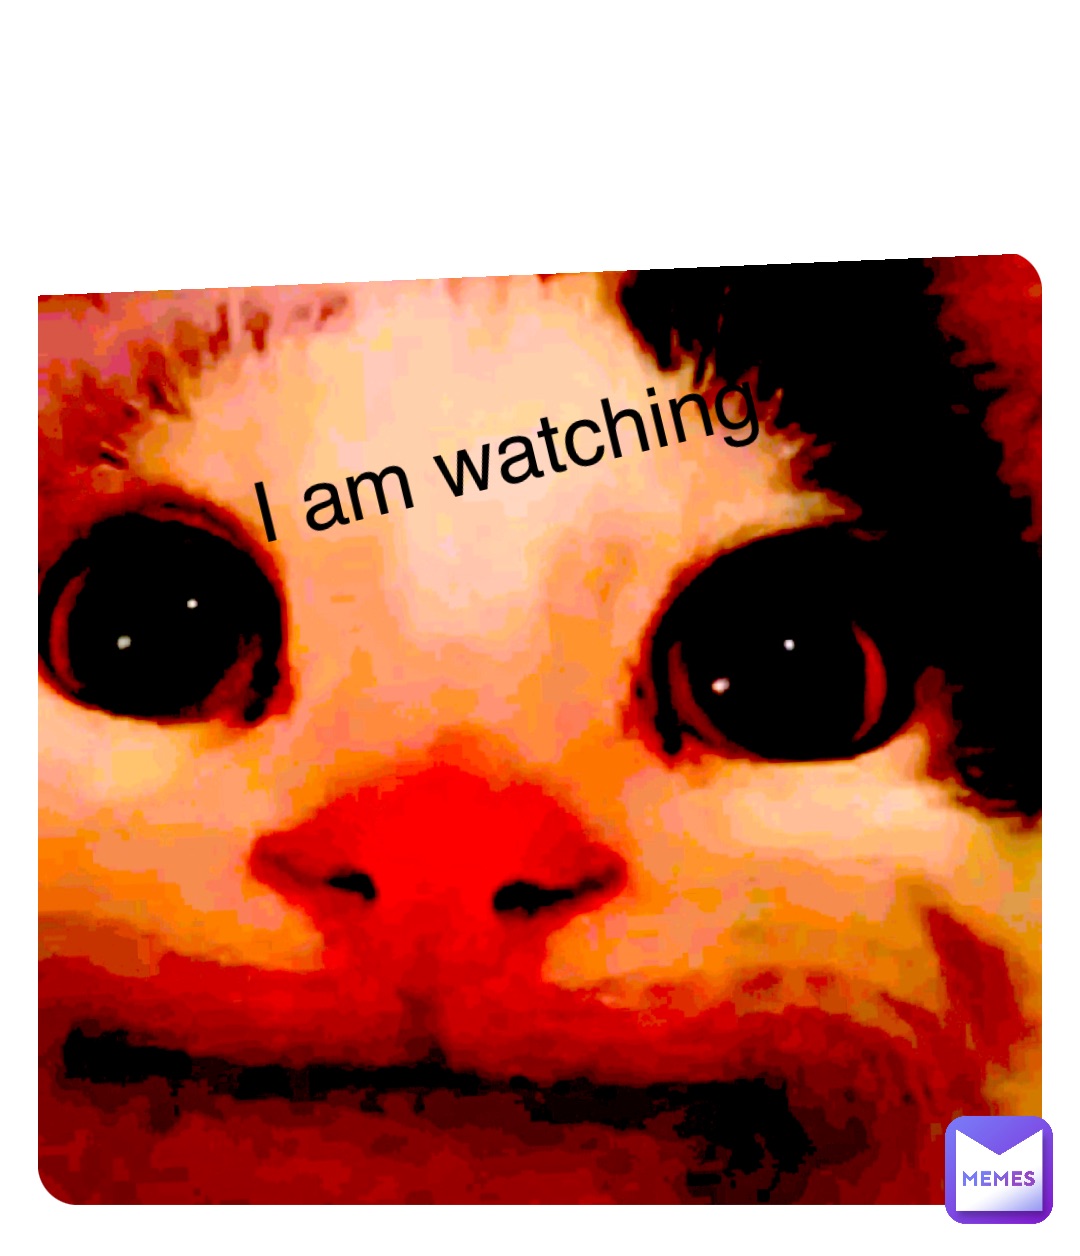 Double tap to edit I am watching u